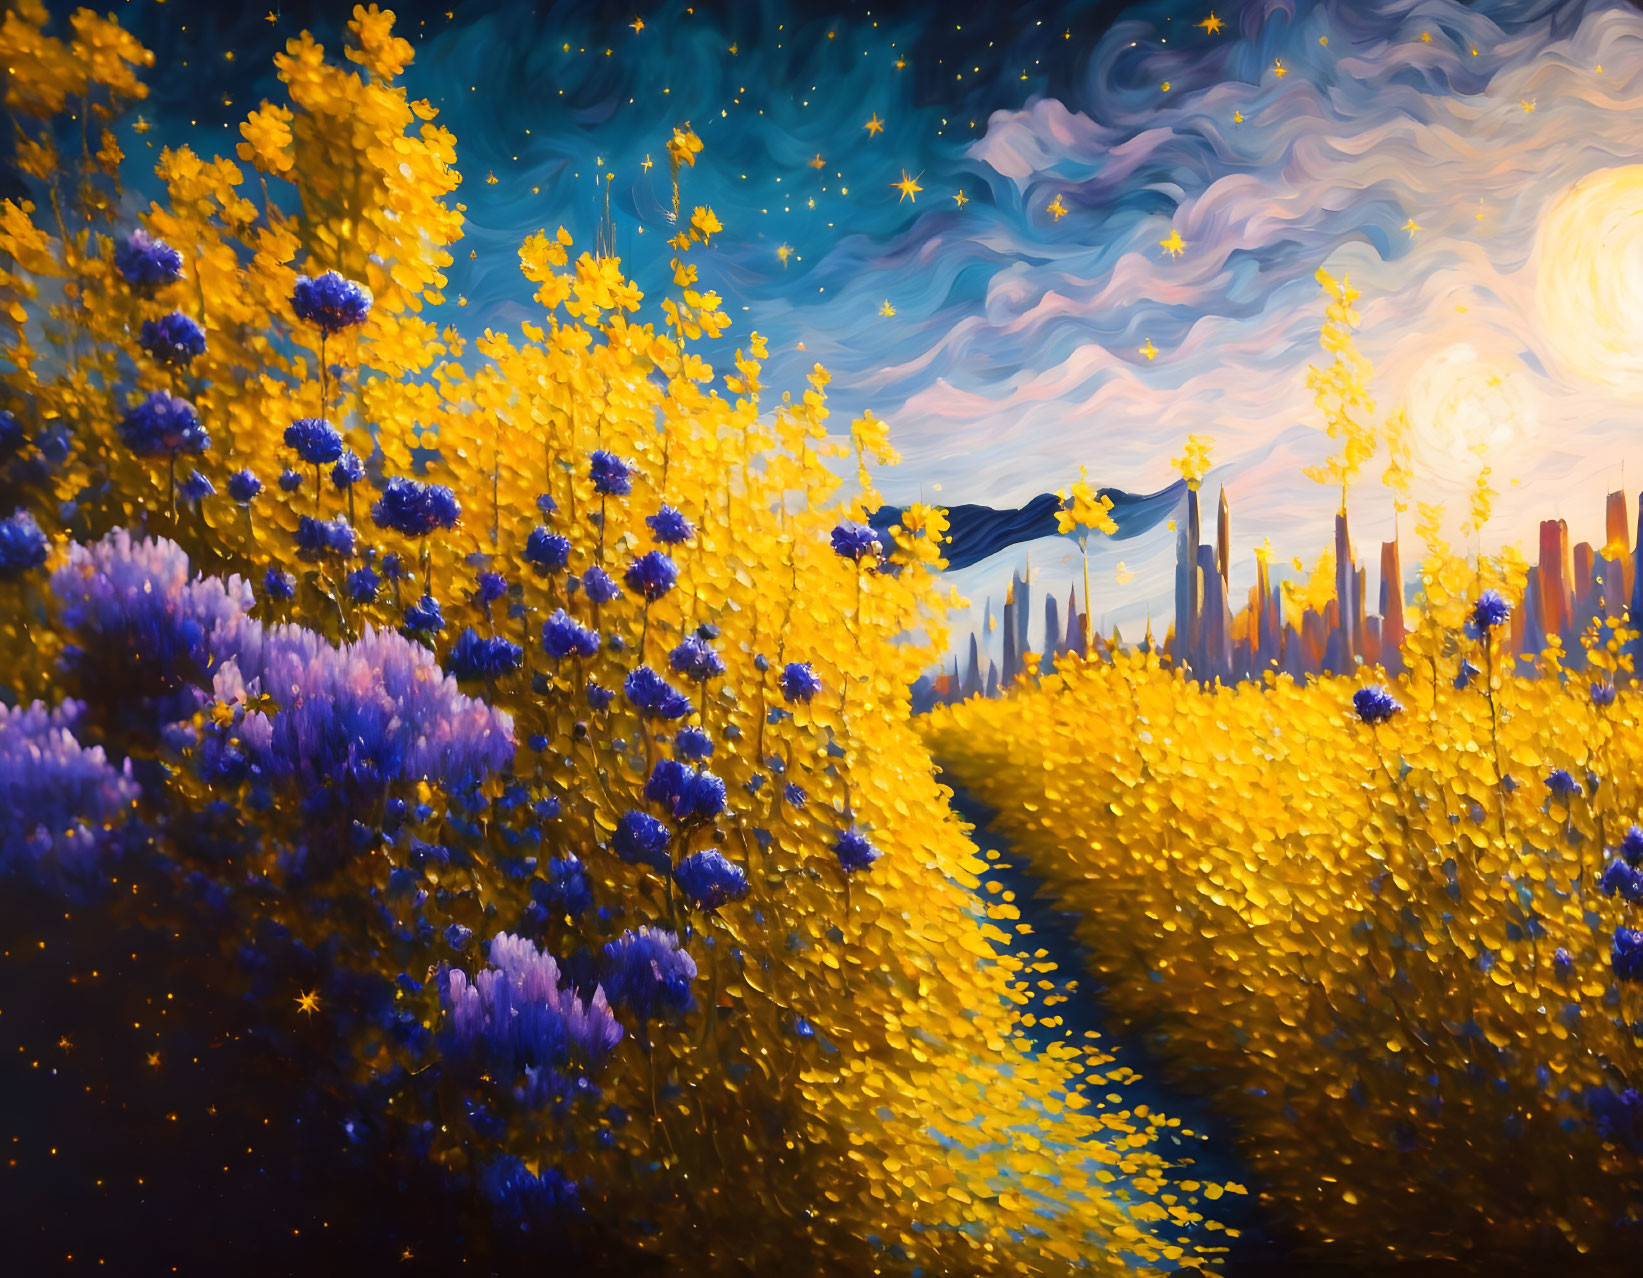 Colorful field painting with starry sky and city skyline